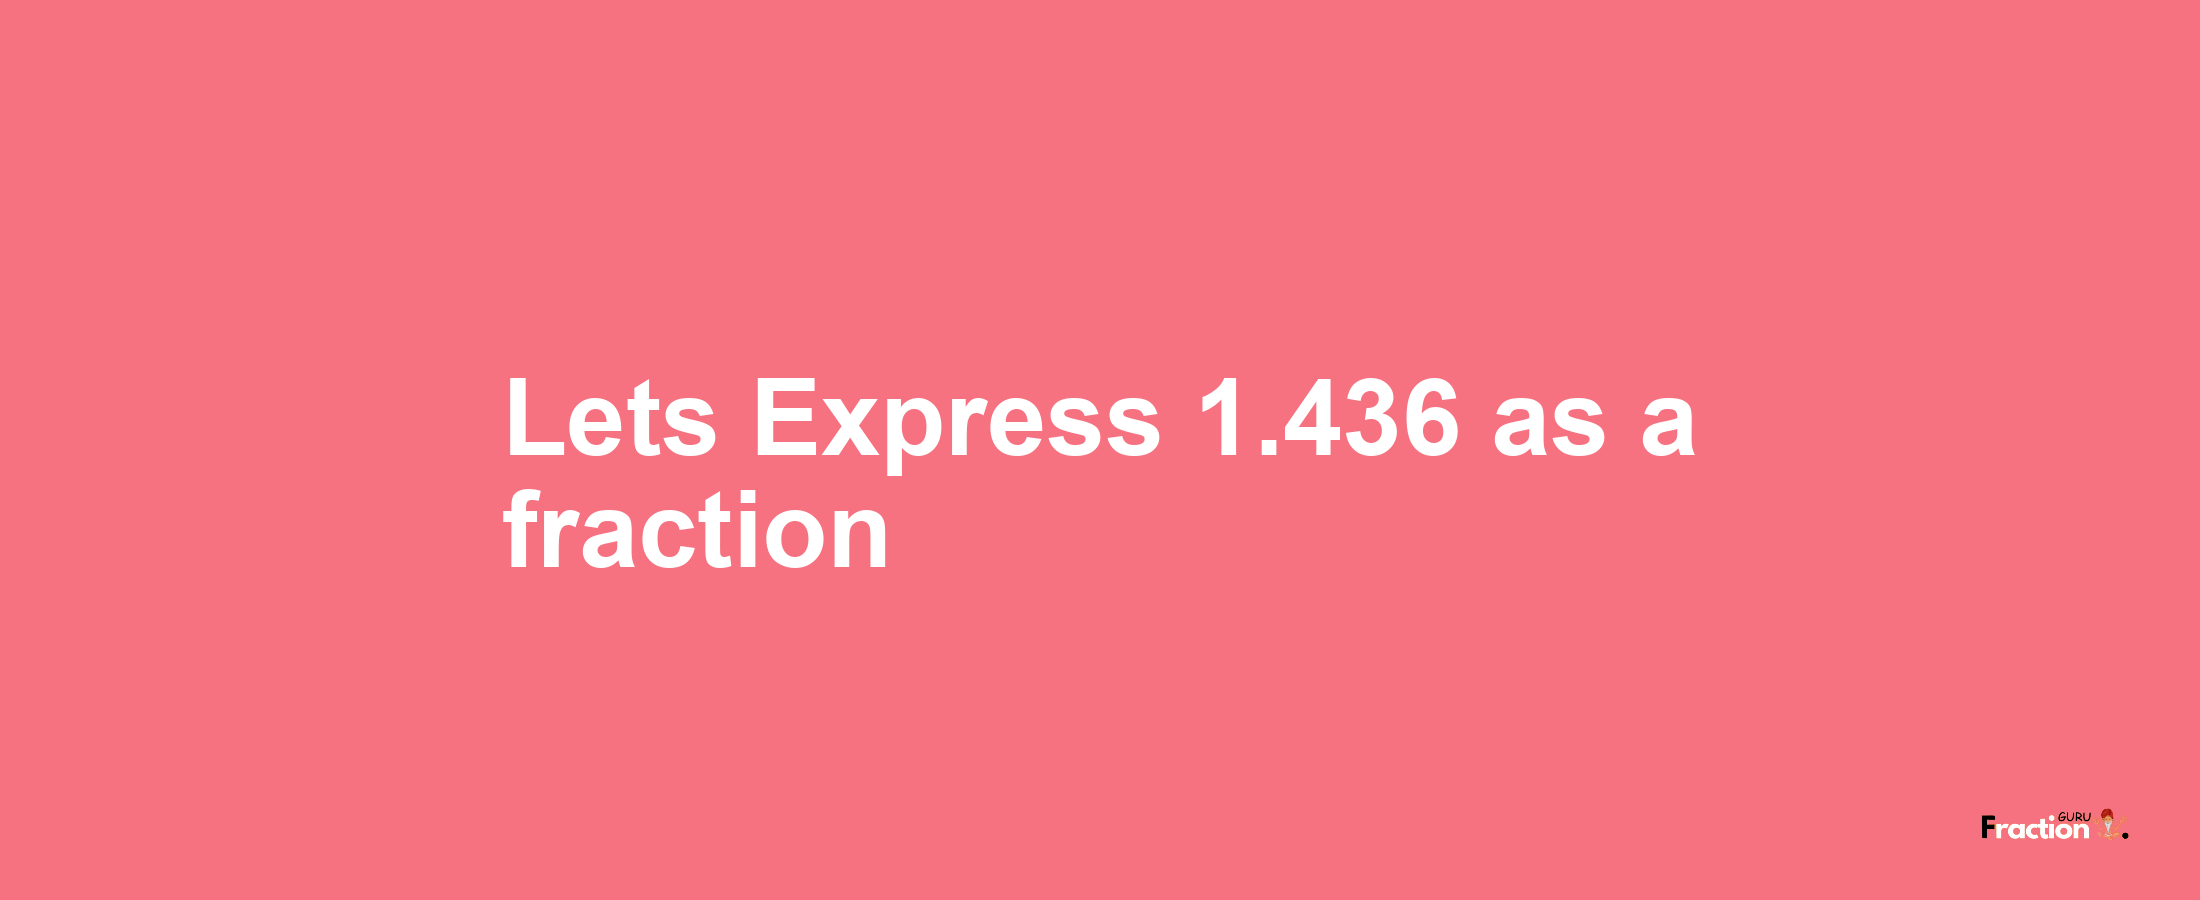 Lets Express 1.436 as afraction